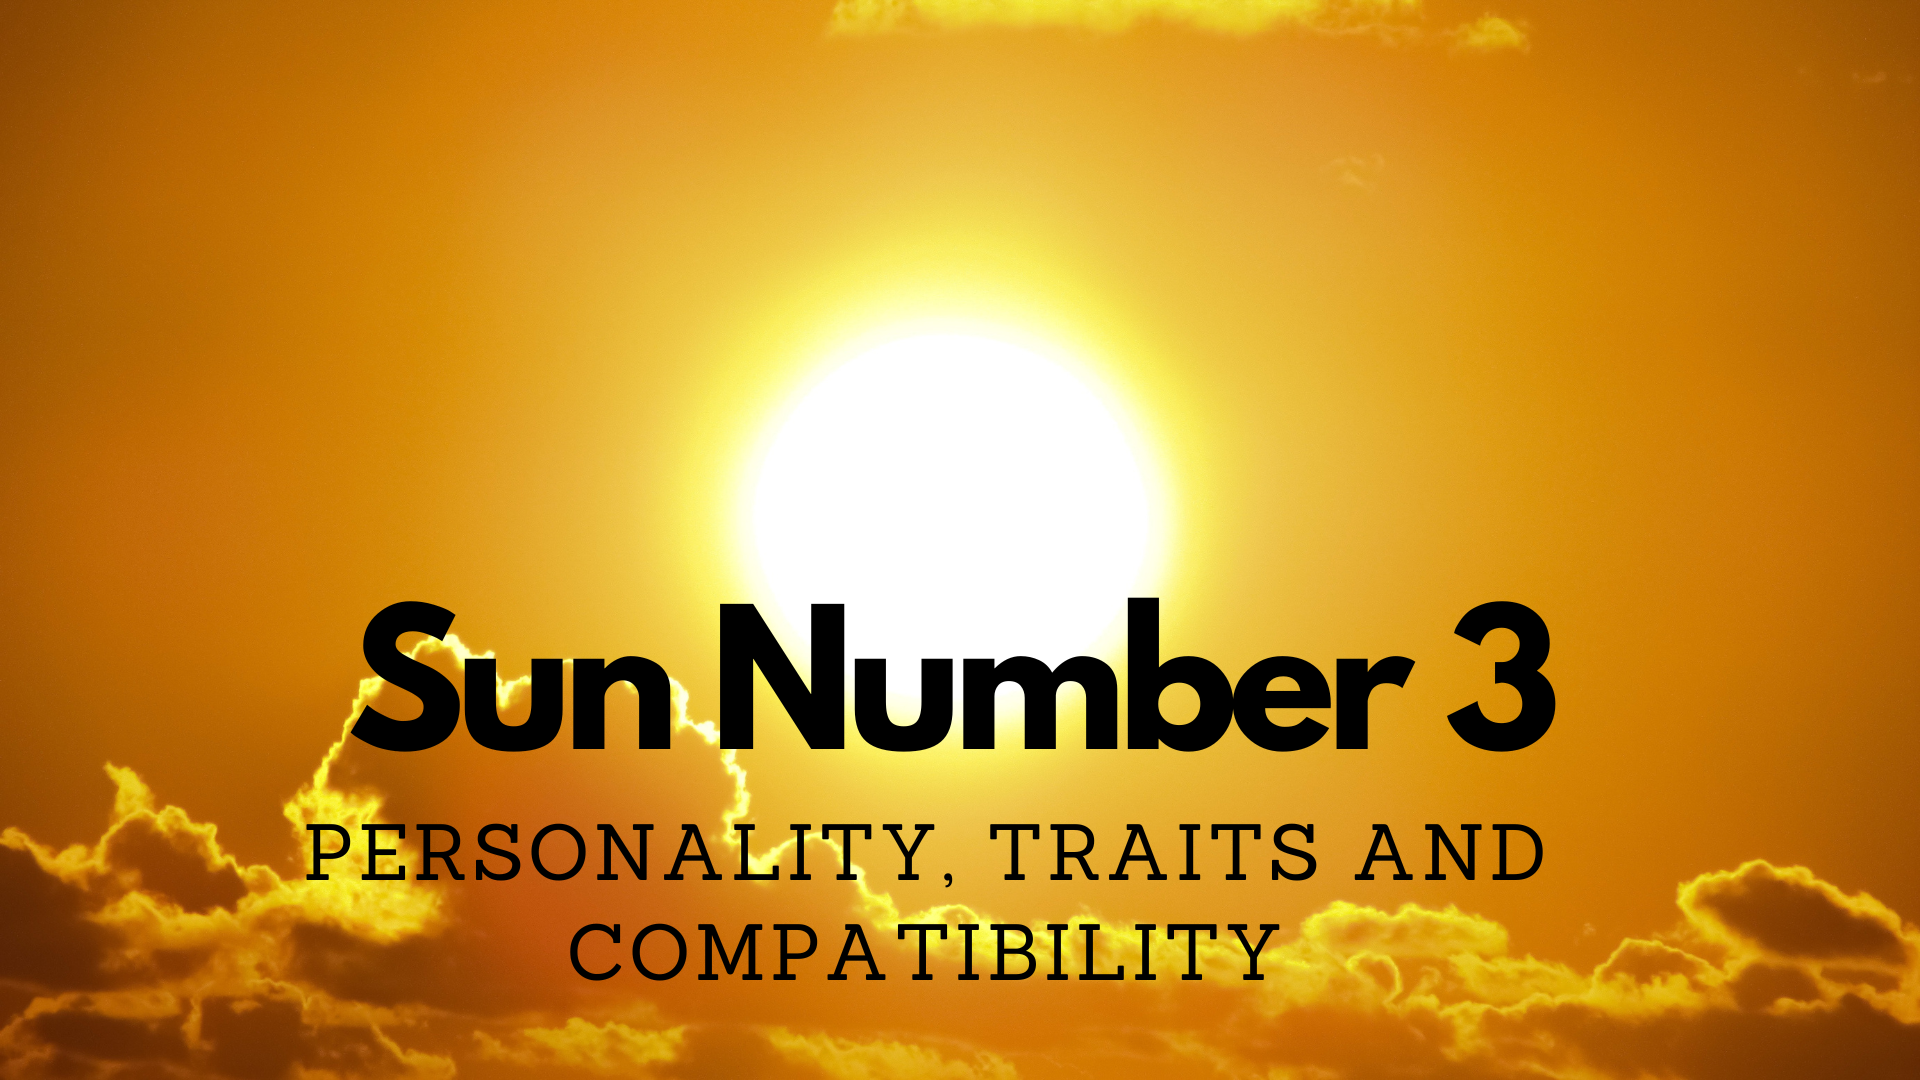 Sun Number 3 In Numerology - Personality, Traits And Compatibility